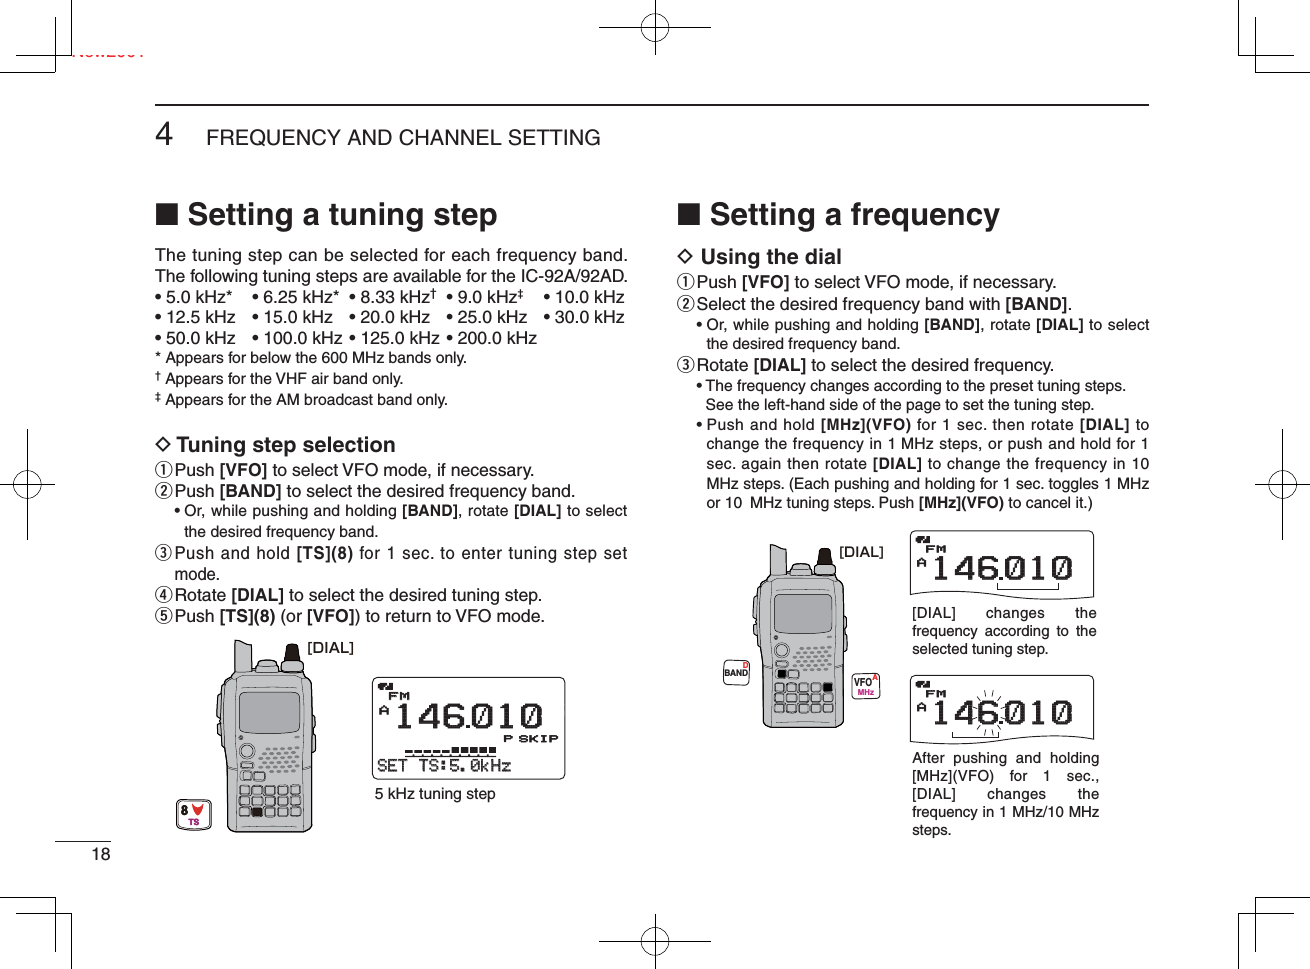 Ne184FREQUENCY AND CHANNEL SETTING New2001■ Setting a tuning stepThe tuning step can be selected for each frequency band. The following tuning steps are available for the IC-92A/92AD.• 5.0 kHz*  • 6.25 kHz*  • 8.33 kHz† • 9.0 kHz‡  • 10.0 kHz• 12.5 kHz  • 15.0 kHz  • 20.0 kHz  • 25.0 kHz  • 30.0 kHz• 50.0 kHz  • 100.0 kHz • 125.0 kHz • 200.0 kHz* Appears for below the 600 MHz bands only. † Appears for the VHF air band only.‡ Appears for the AM broadcast band only.D Tuning step selectionq Push  [VFO] to select VFO mode, if necessary.w Push  [BAND] to select the desired frequency band. •  Or, while pushing and holding [BAND], rotate [DIAL] to select the desired frequency band.e  Push and hold [TS](8) for 1 sec. to enter tuning step set mode.r Rotate  [DIAL] to select the desired tuning step.t Push  [TS](8) (or [VFO]) to return to VFO mode.■ Setting a frequencyD Using the dialq Push  [VFO] to select VFO mode, if necessary.w Select the desired frequency band with [BAND]. •  Or, while pushing and holding [BAND], rotate [DIAL] to select the desired frequency band.e Rotate  [DIAL] to select the desired frequency. •  The frequency changes according to the preset tuning steps. See the left-hand side of the page to set the tuning step. •  Push and hold [MHz](VFO) for 1 sec. then rotate [DIAL] to change the frequency in 1 MHz steps, or push and hold for 1 sec. again then rotate [DIAL] to change the frequency in 10 MHz steps. (Each pushing and holding for 1 sec. toggles 1 MHz or 10  MHz tuning steps. Push [MHz](VFO) to cancel it.)APRIOPRIO WXEMREMRDTCSDTCSFMFM146010P+DUP+DUP2525SETSET-TS:5.0kHzTS:5.0kHzμ000SKIP5 kHz tuning step[DIAL]8TSAPRIOPRIO WXEMREMRDTCSDTCSFM146010+DUP+DUP25APRIOPRIO WXEMREMRDTCSDTCSFM146010+DUP+DUP25[DIAL] changes the frequency according to the selected tuning step.After pushing and holding [MHz](VFO) for 1 sec., [DIAL] changes the frequency in 1 MHz/10 MHz steps.BANDVFOMHzAD[DIAL]